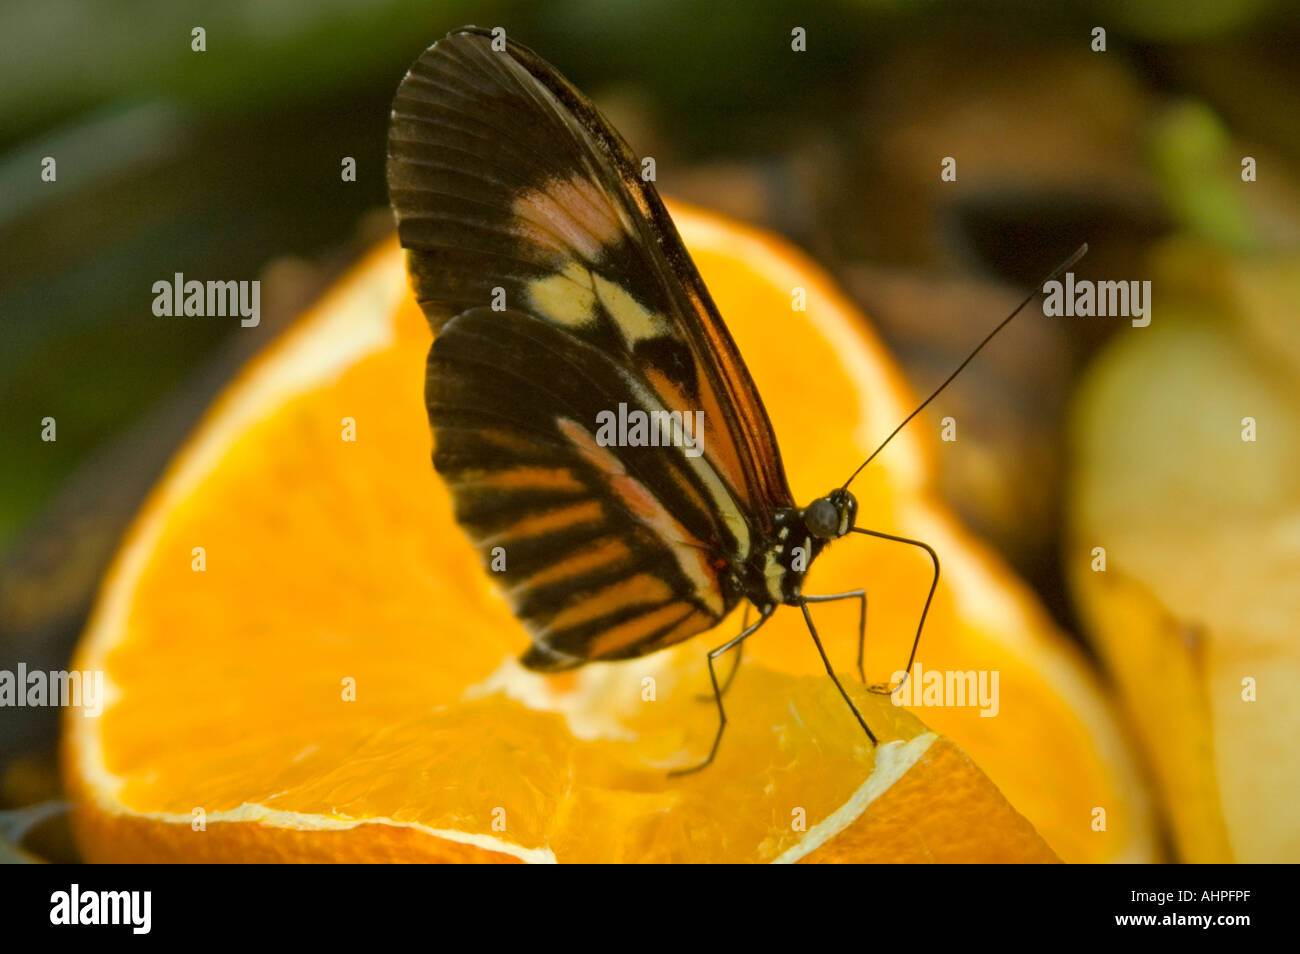 Horizontal close up of a small Postman Longwing butterfly 'Heliconius Melpomene' feeding on an orange. Stock Photo